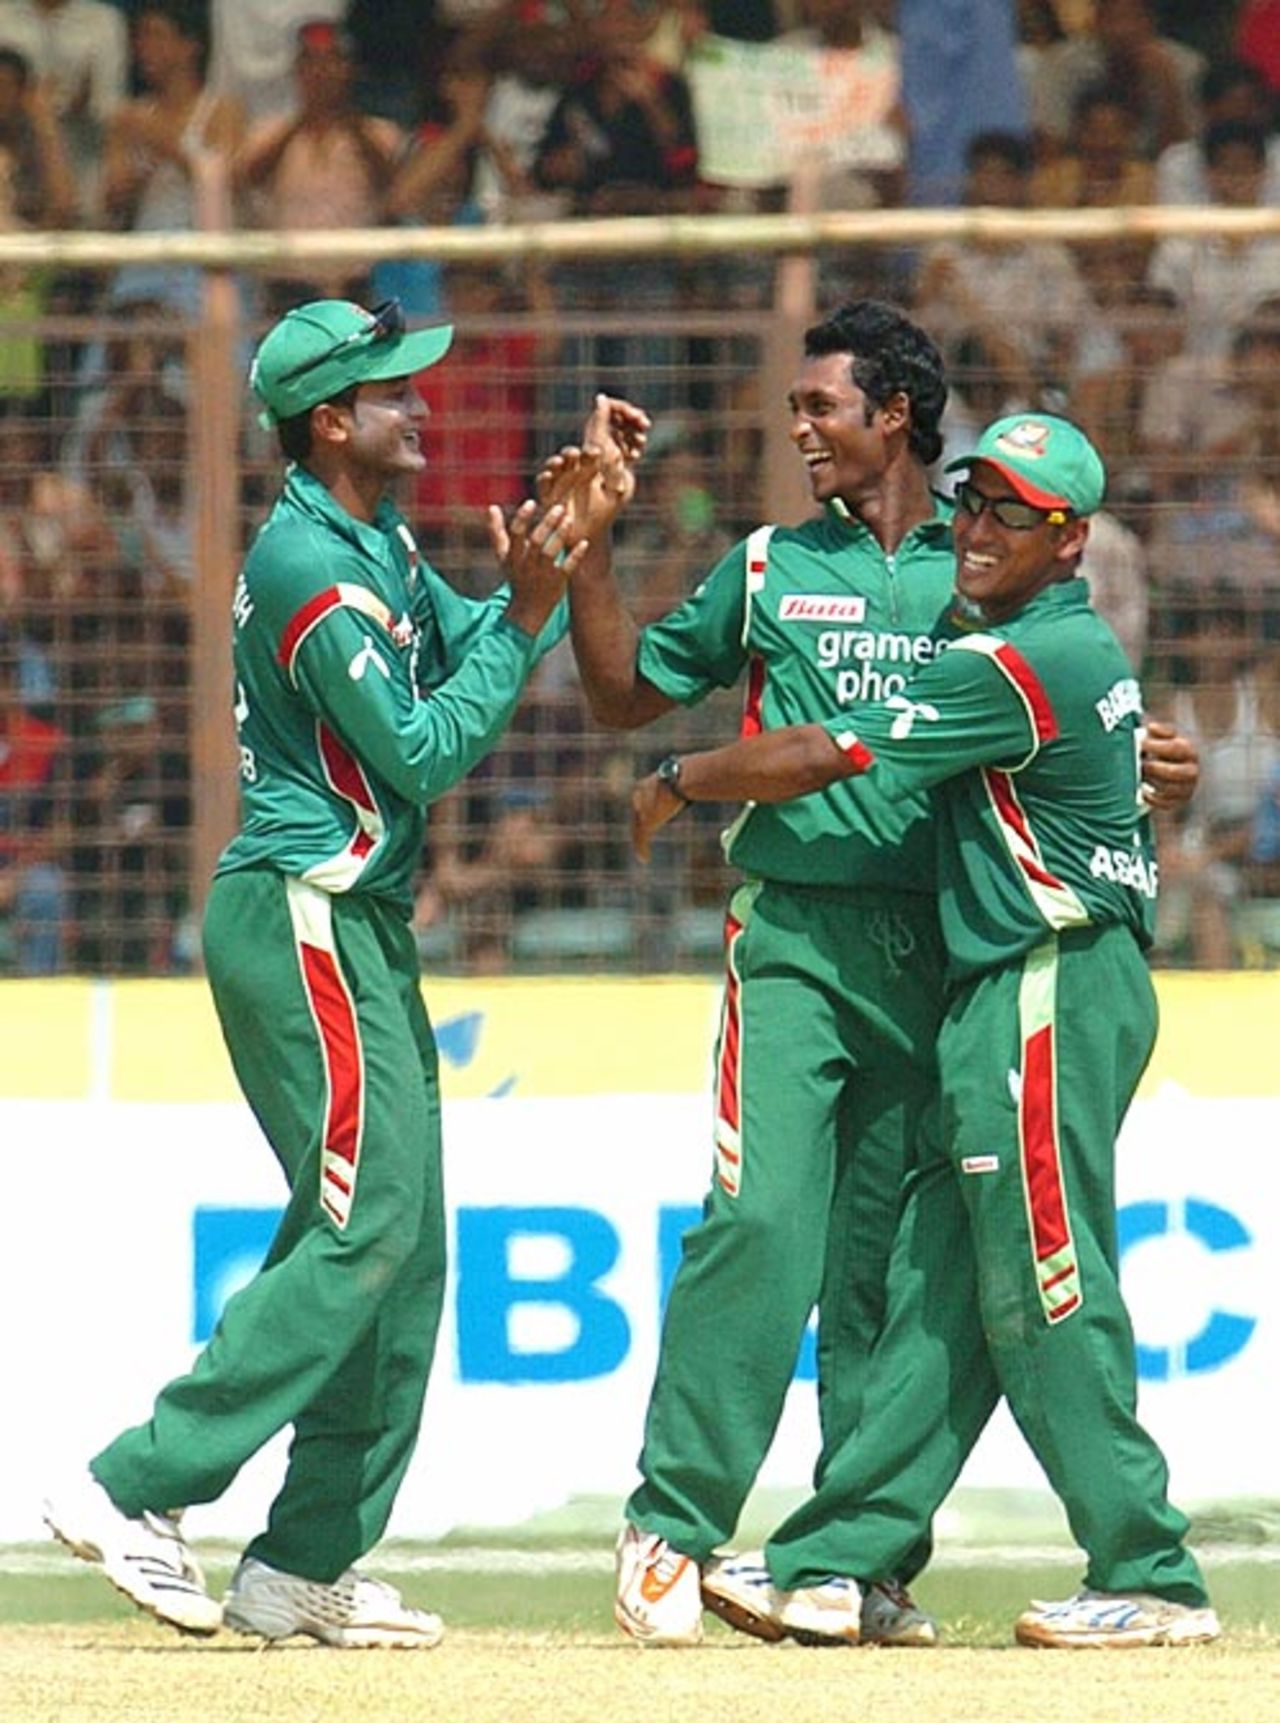 Naeem Islam gets the congratulations from team-mates after picking up Jamie How's wicket , Bangladesh v New Zealand, 3rd ODI, Chittagong, October 14, 2008